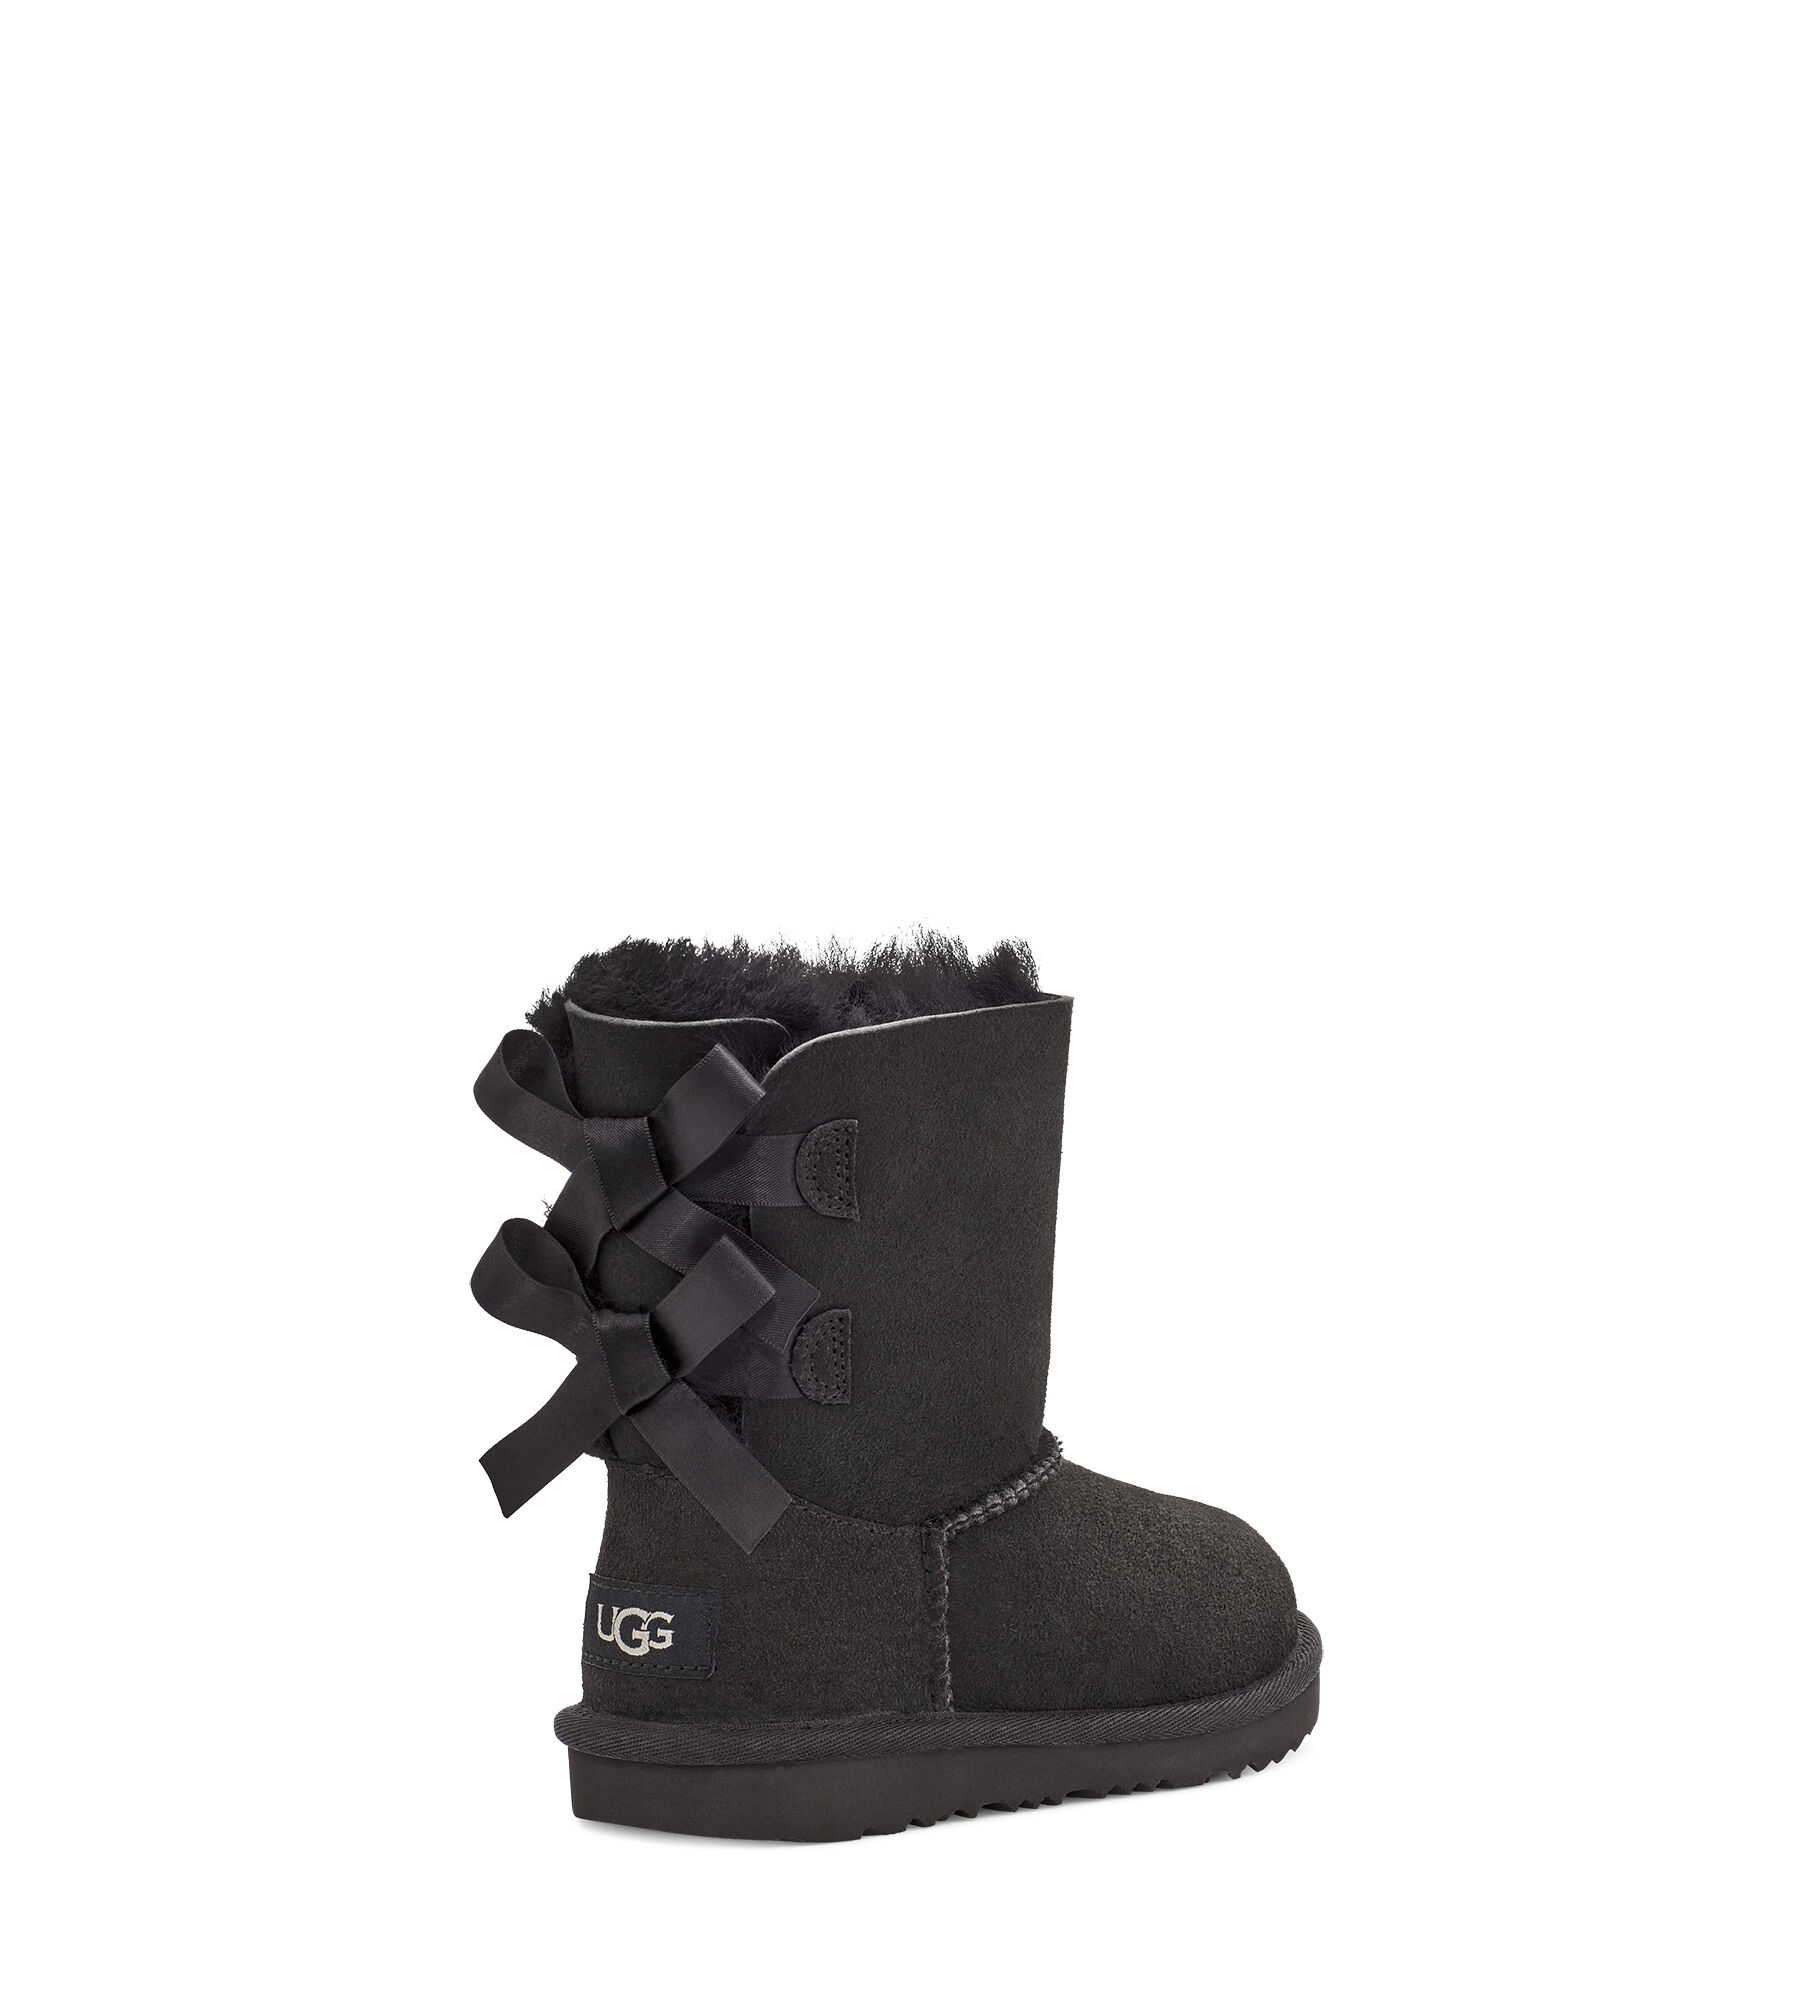 toddler ugg boots size 5